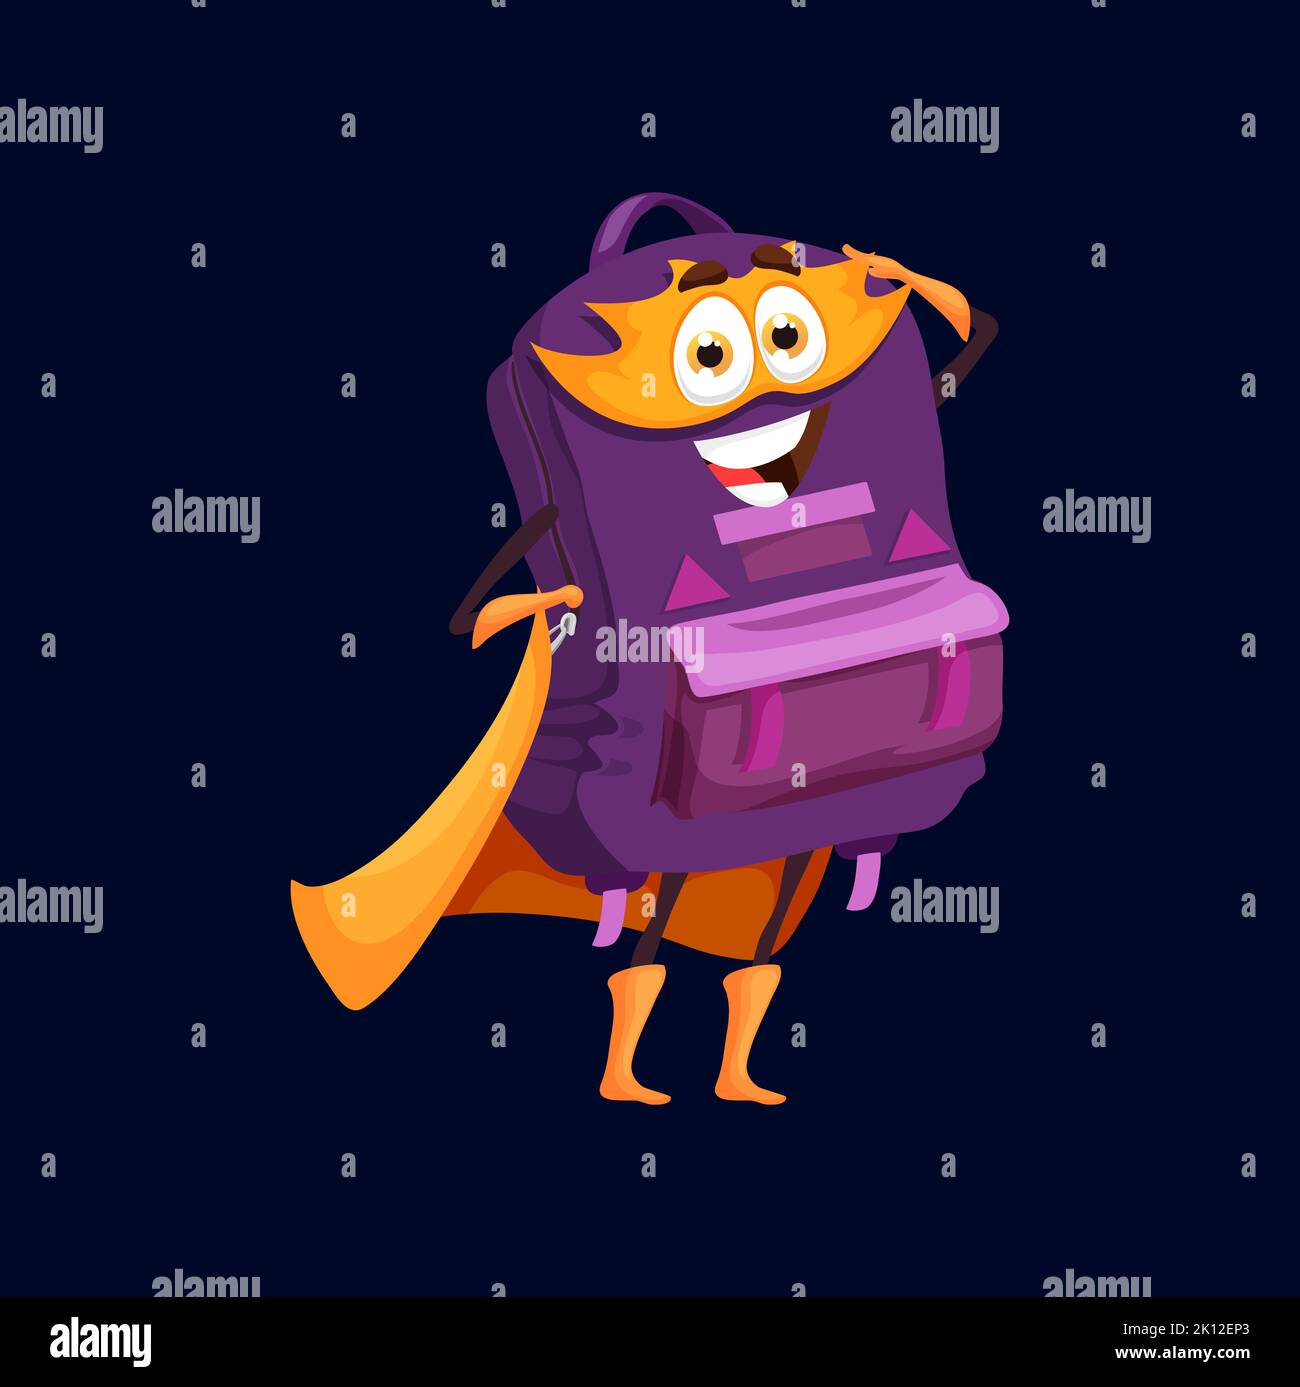 Cartoon school bag superhero character. Funny vector backpack with cute smiling face wear orange cloak and mask. Student supply, rucksack, knapsack accessory superhero personage ready for feat Stock Vector